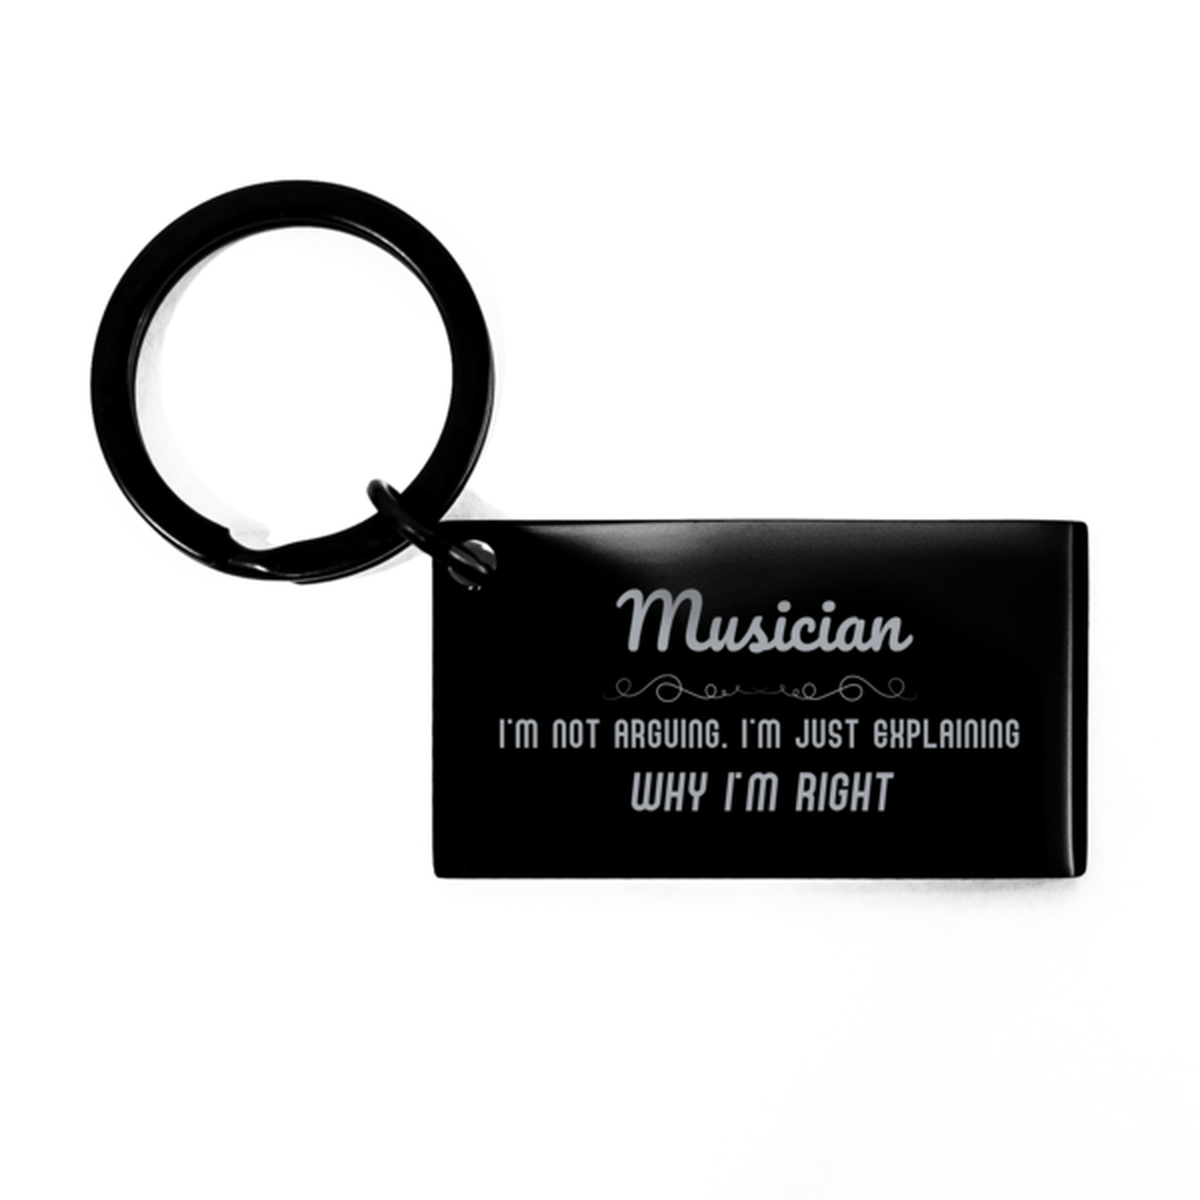 Musician I'm not Arguing. I'm Just Explaining Why I'm RIGHT Keychain, Funny Saying Quote Musician Gifts For Musician Graduation Birthday Christmas Gifts for Men Women Coworker